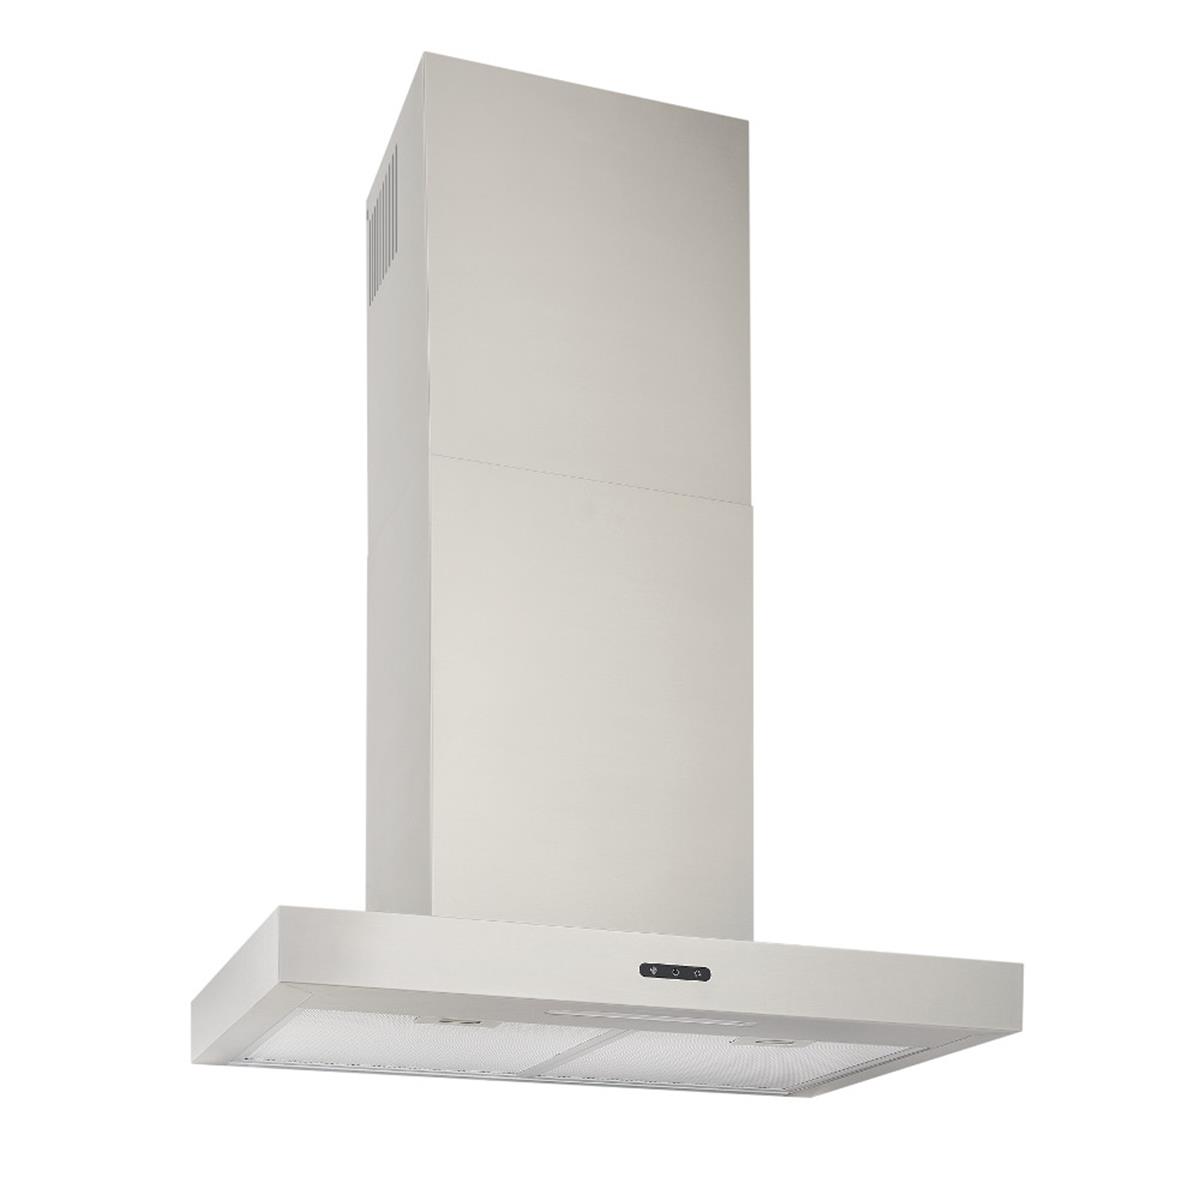 Broan Ew4336ss 36 In. Convertible Wall Mount T-style Chimney Range Hood With Led Light, Stainless Steel